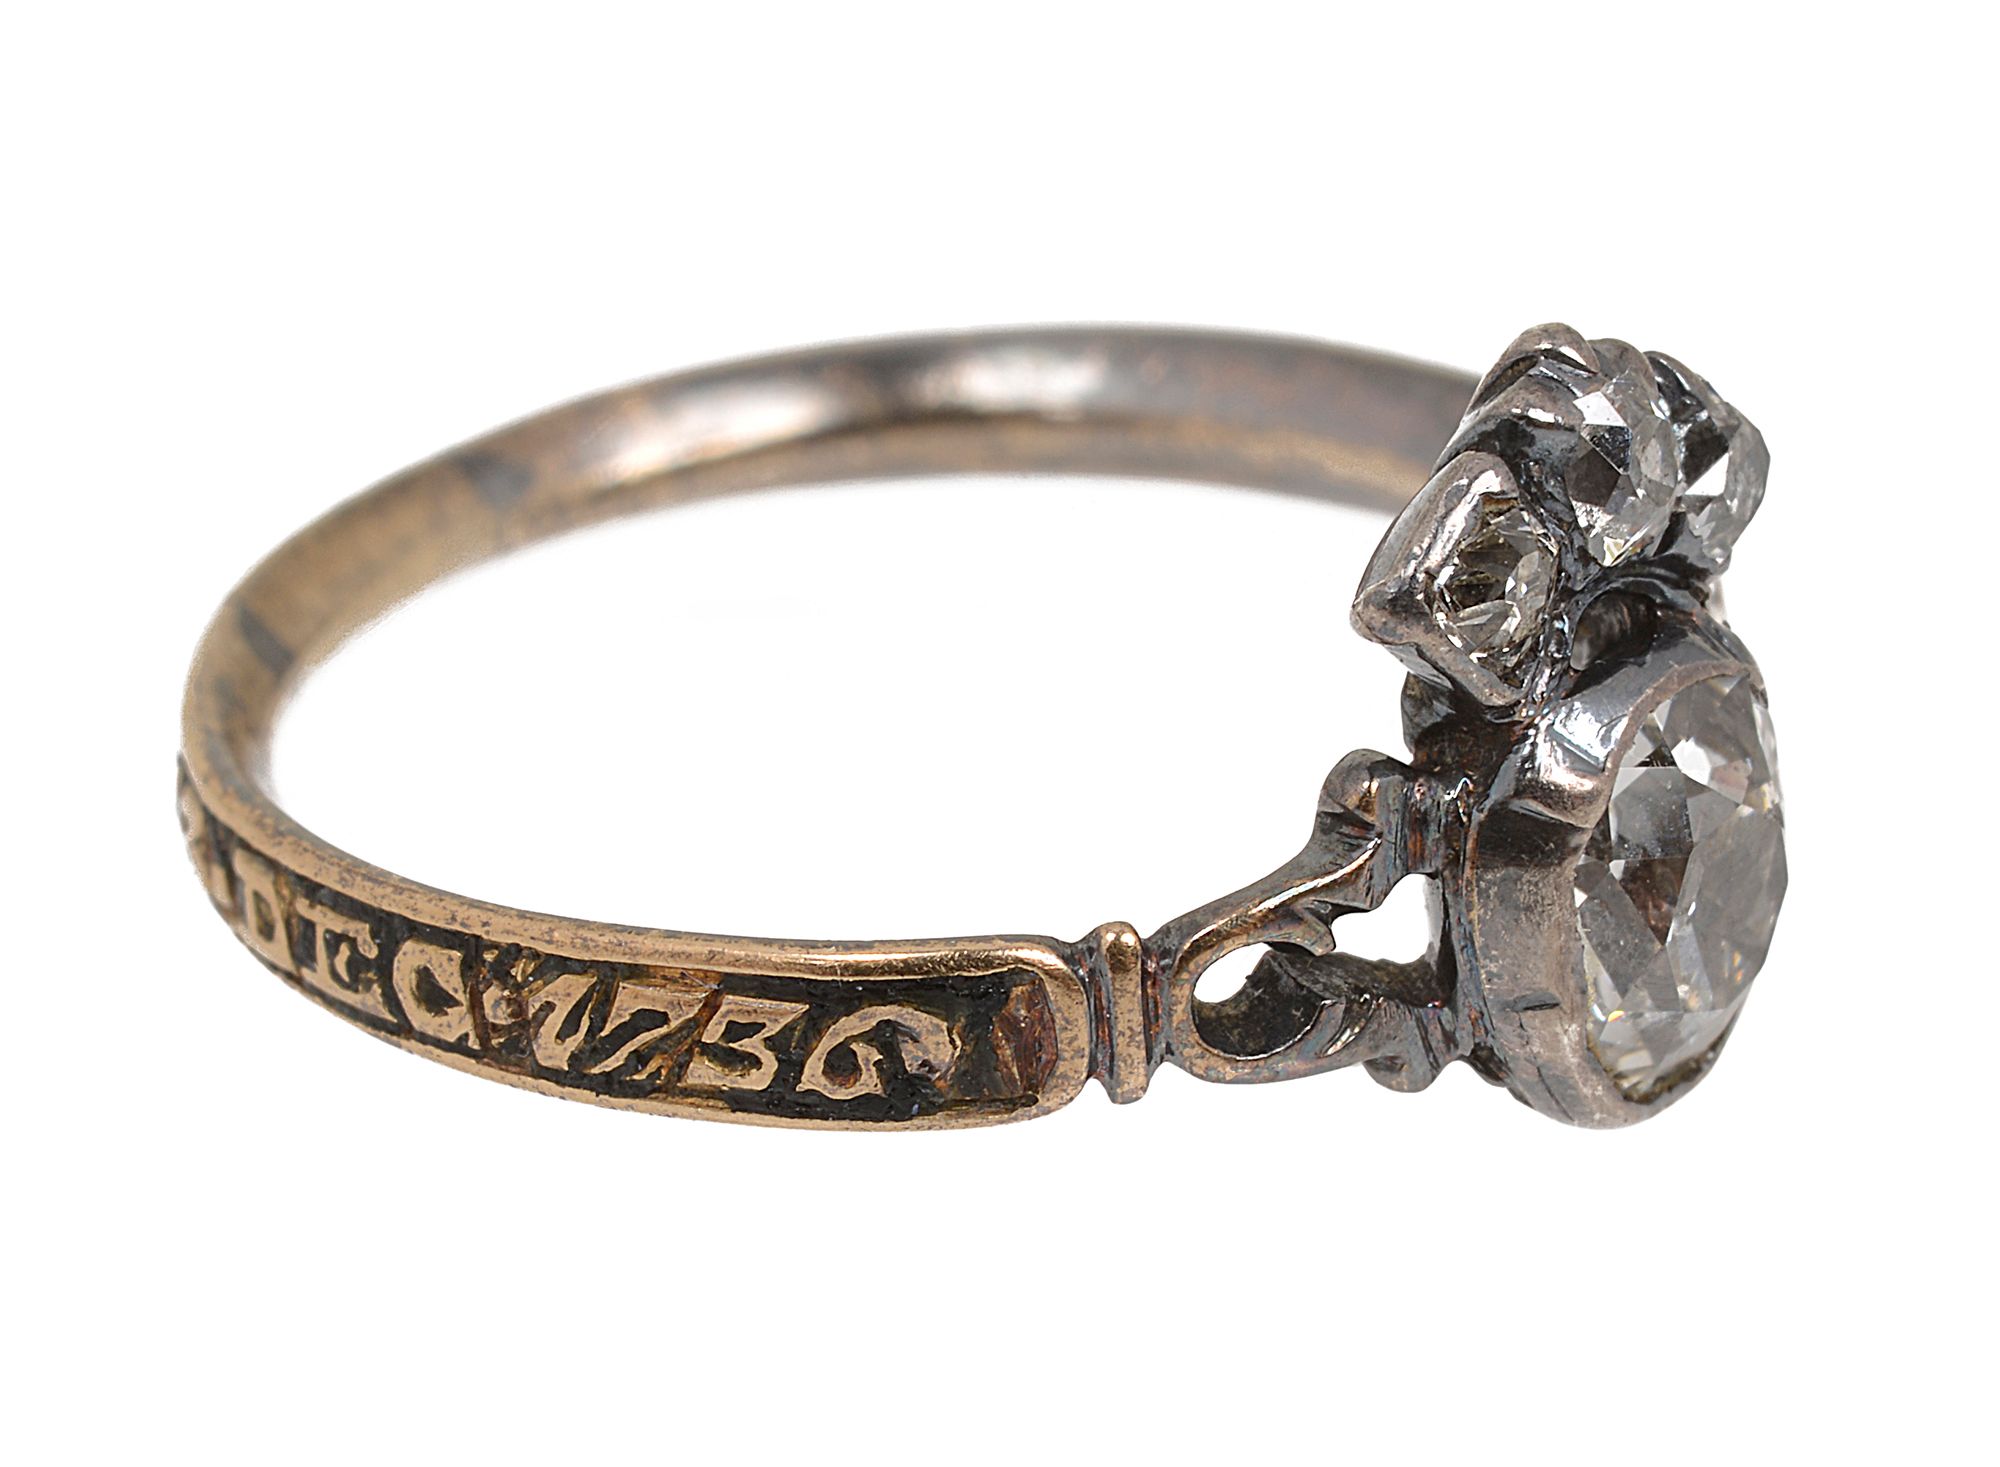 A mid 18th century diamond and enamel memorial ring - Image 2 of 3